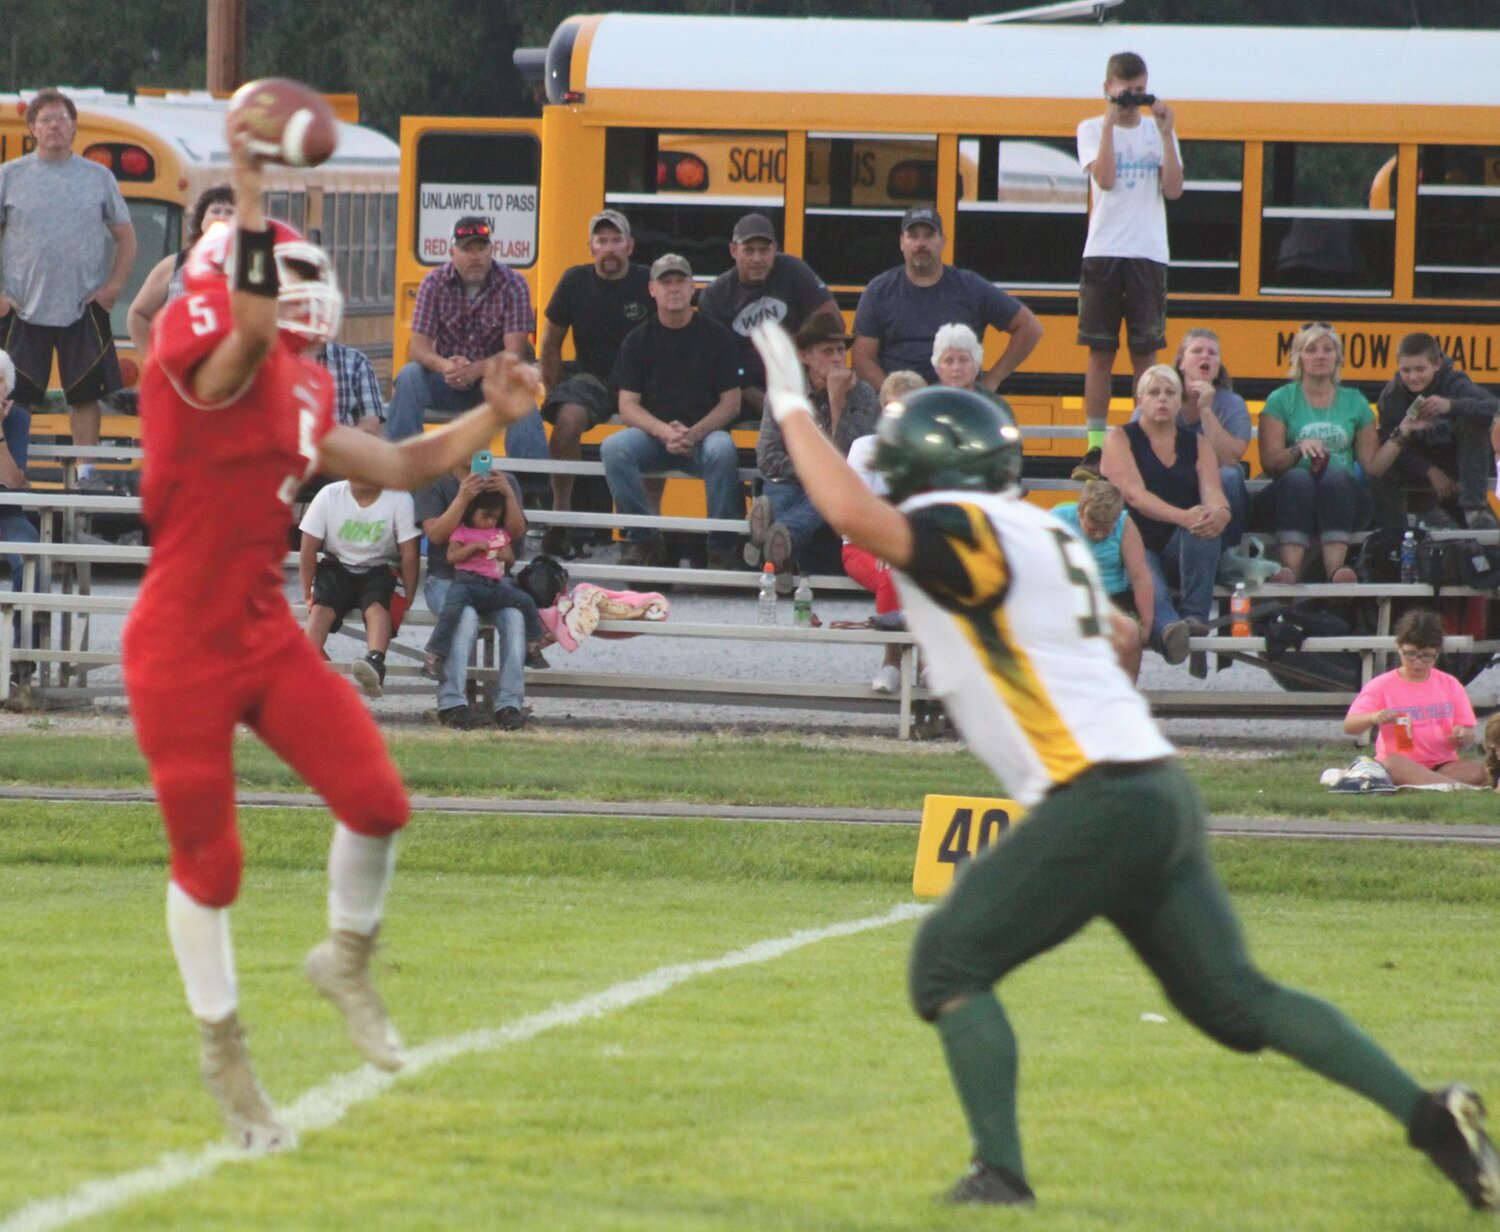 Senior quarterback Connor Wiggs goes to the air over a Liberty Bell defender.